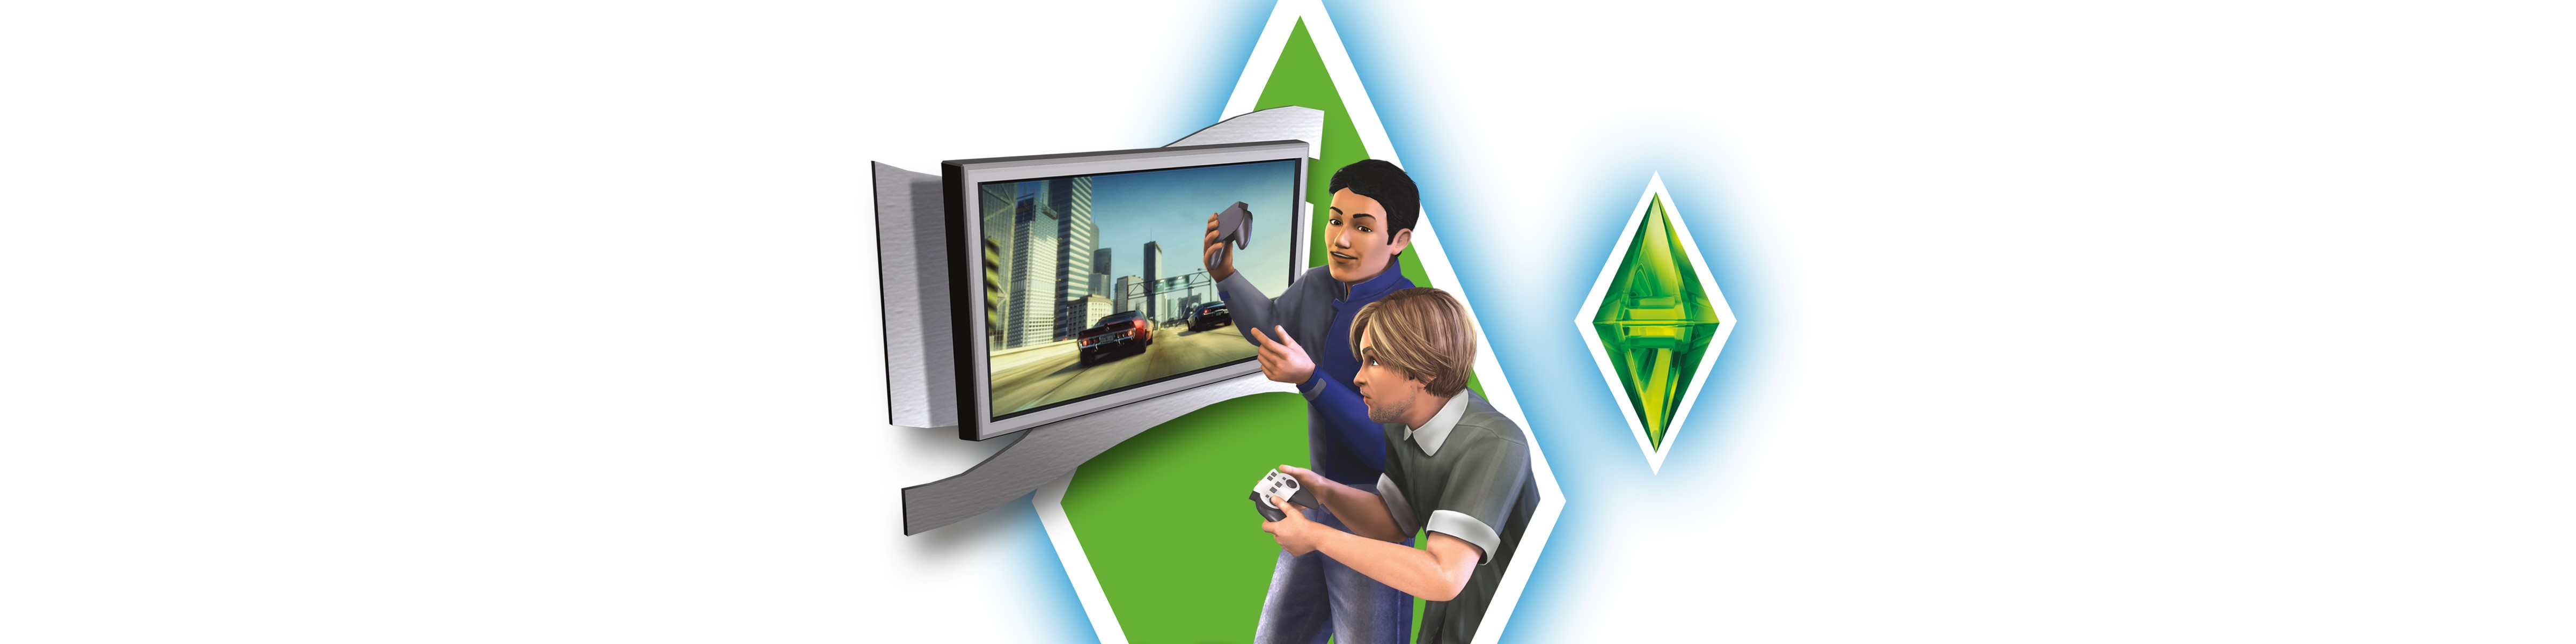 sims 3 into the future iso